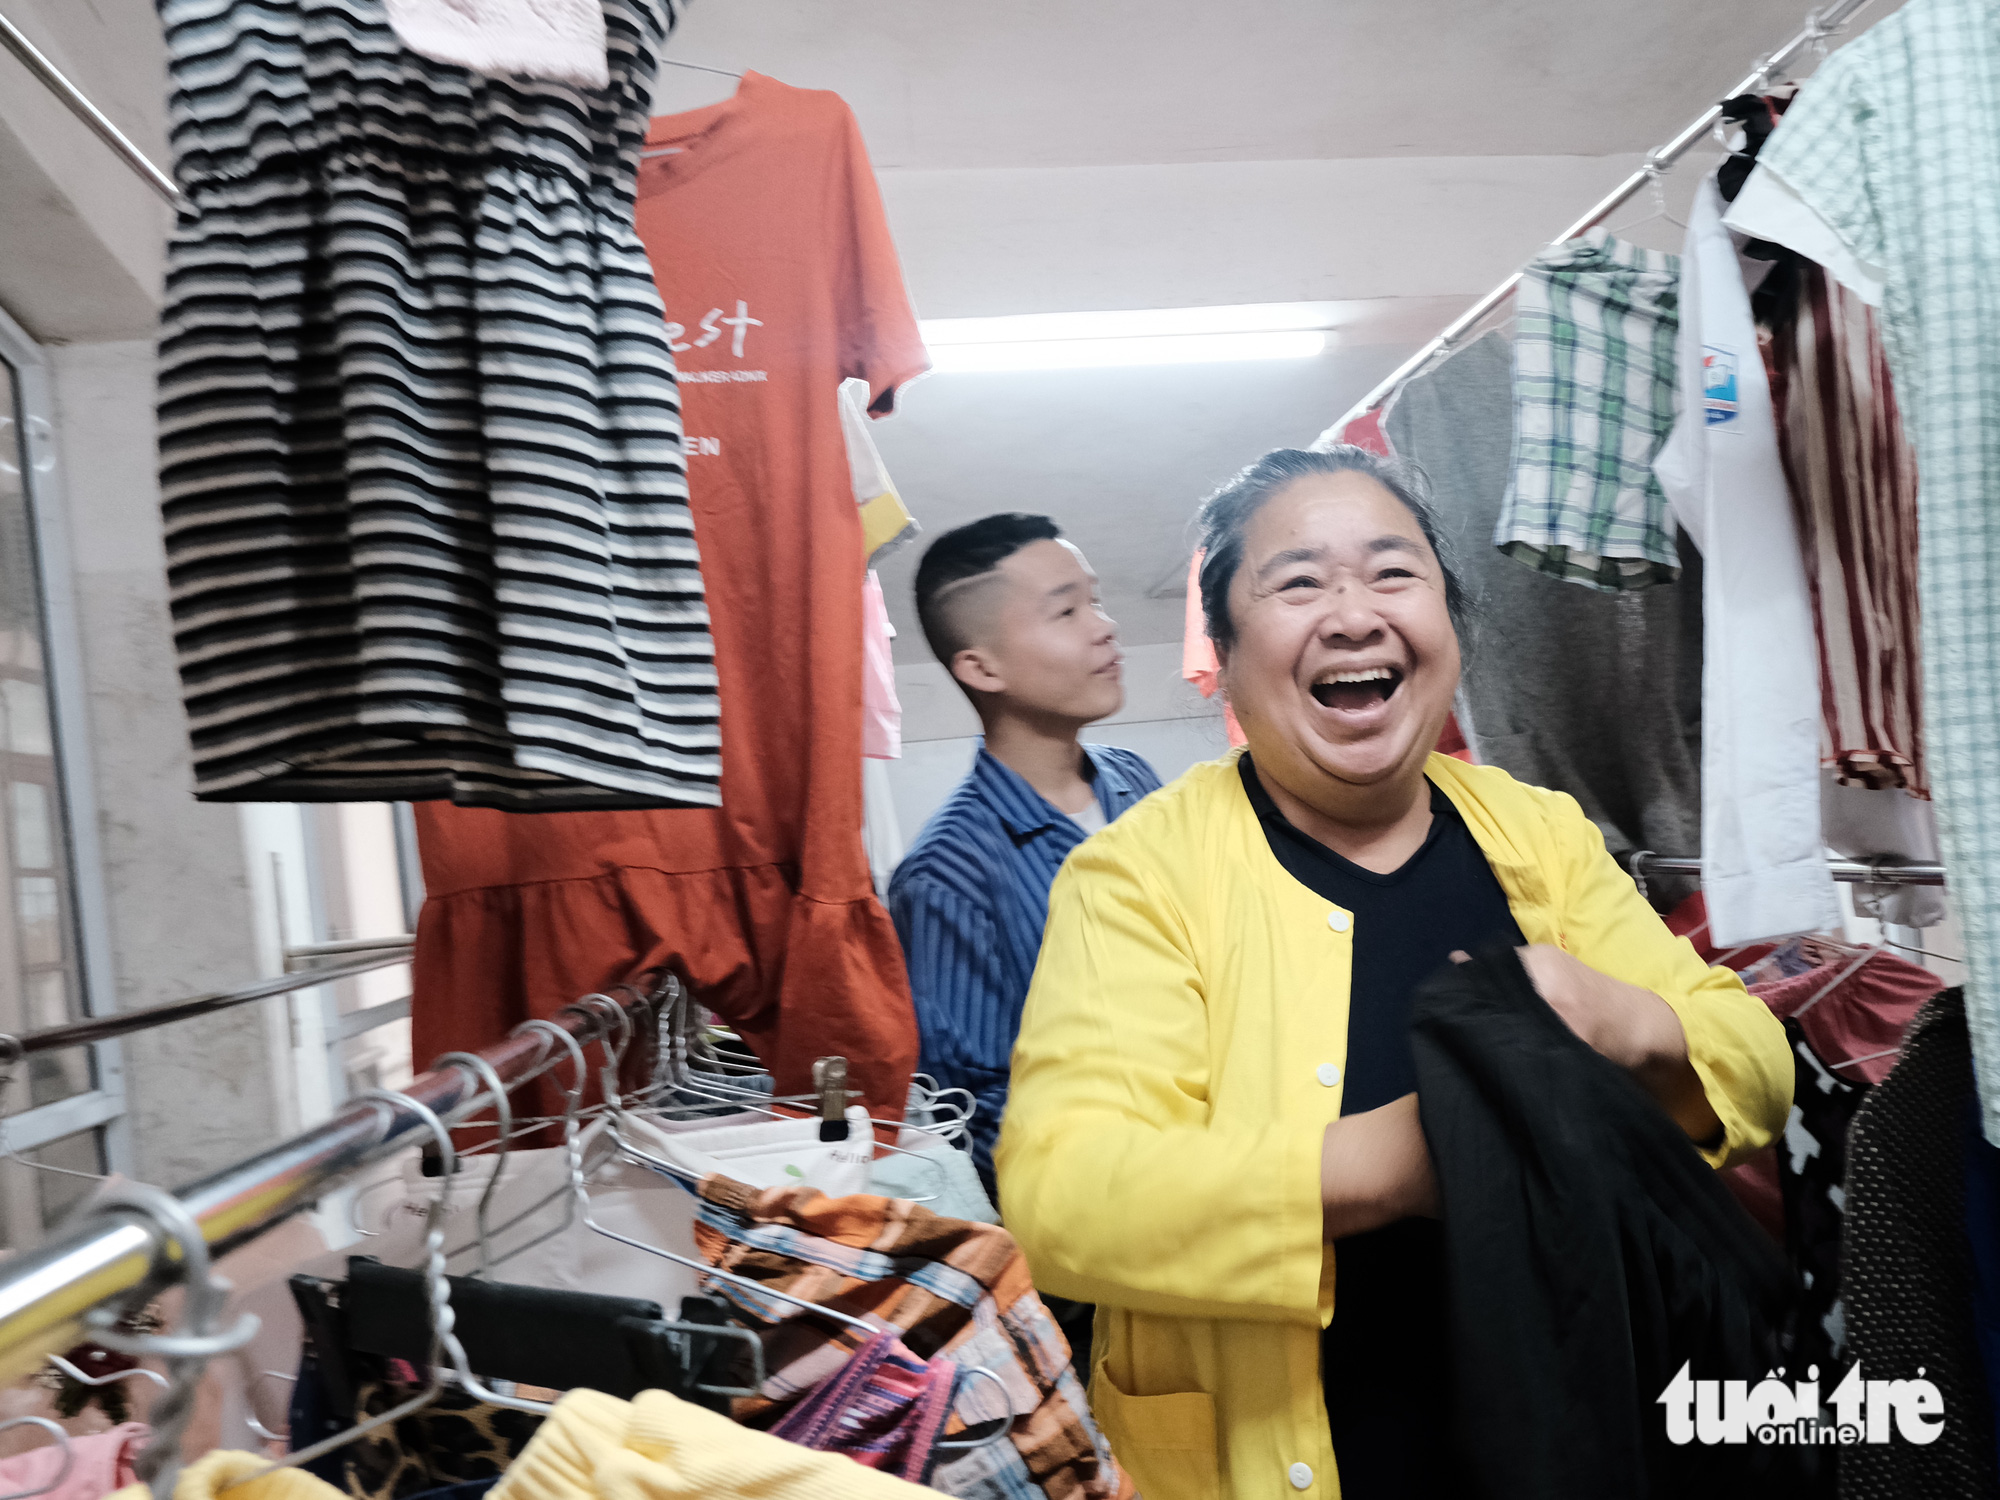 Bui Thi Nu, a caretaker, is happy to choose clothes for her husband at the “zero-dong shop”. Photo: Ha Thanh / Tuoi Tre